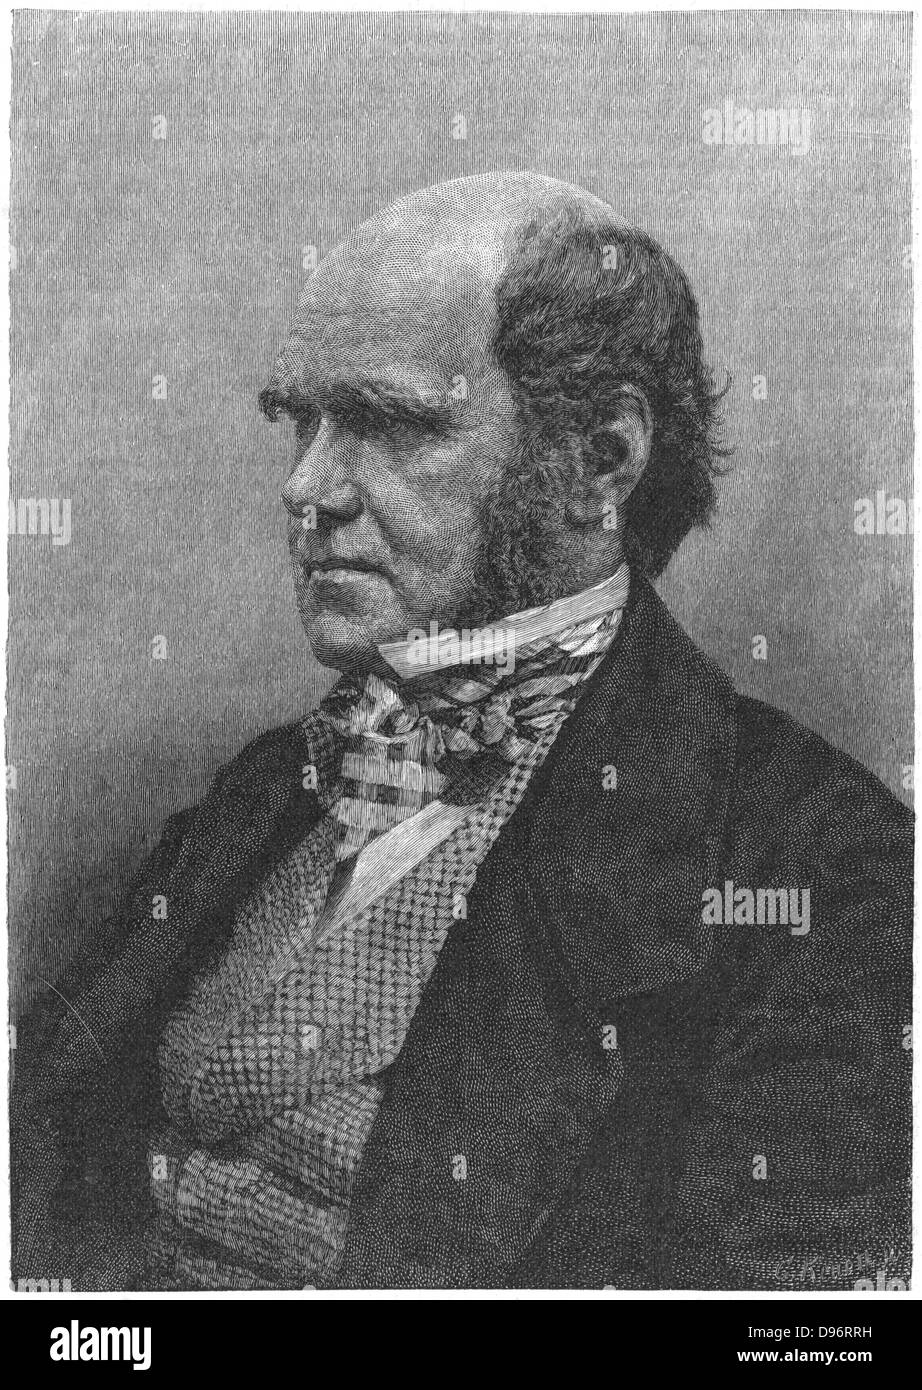 Charles Darwin (1809-1882) English naturalist. Evolution by Natural Selection. Engraving from 'Harper's New Monthly Magazine', European edition, 1884.  Engraving. Stock Photo